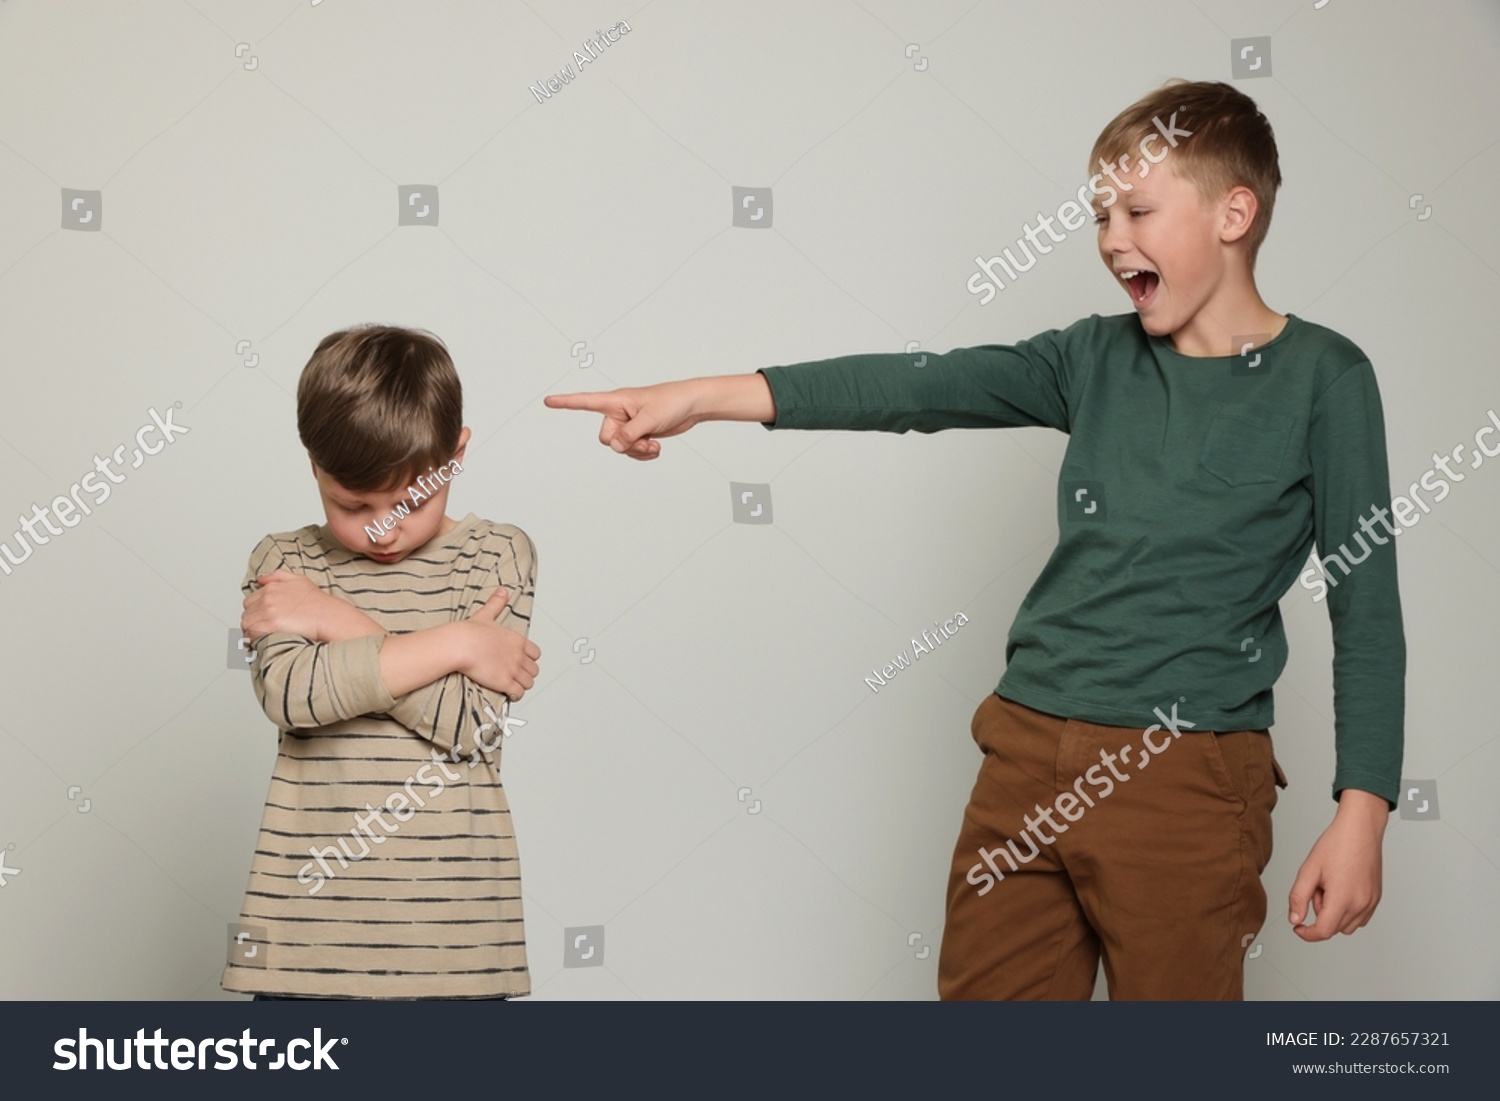 Boy laughing and pointing at upset kid on light grey background. Children's bullying #2287657321